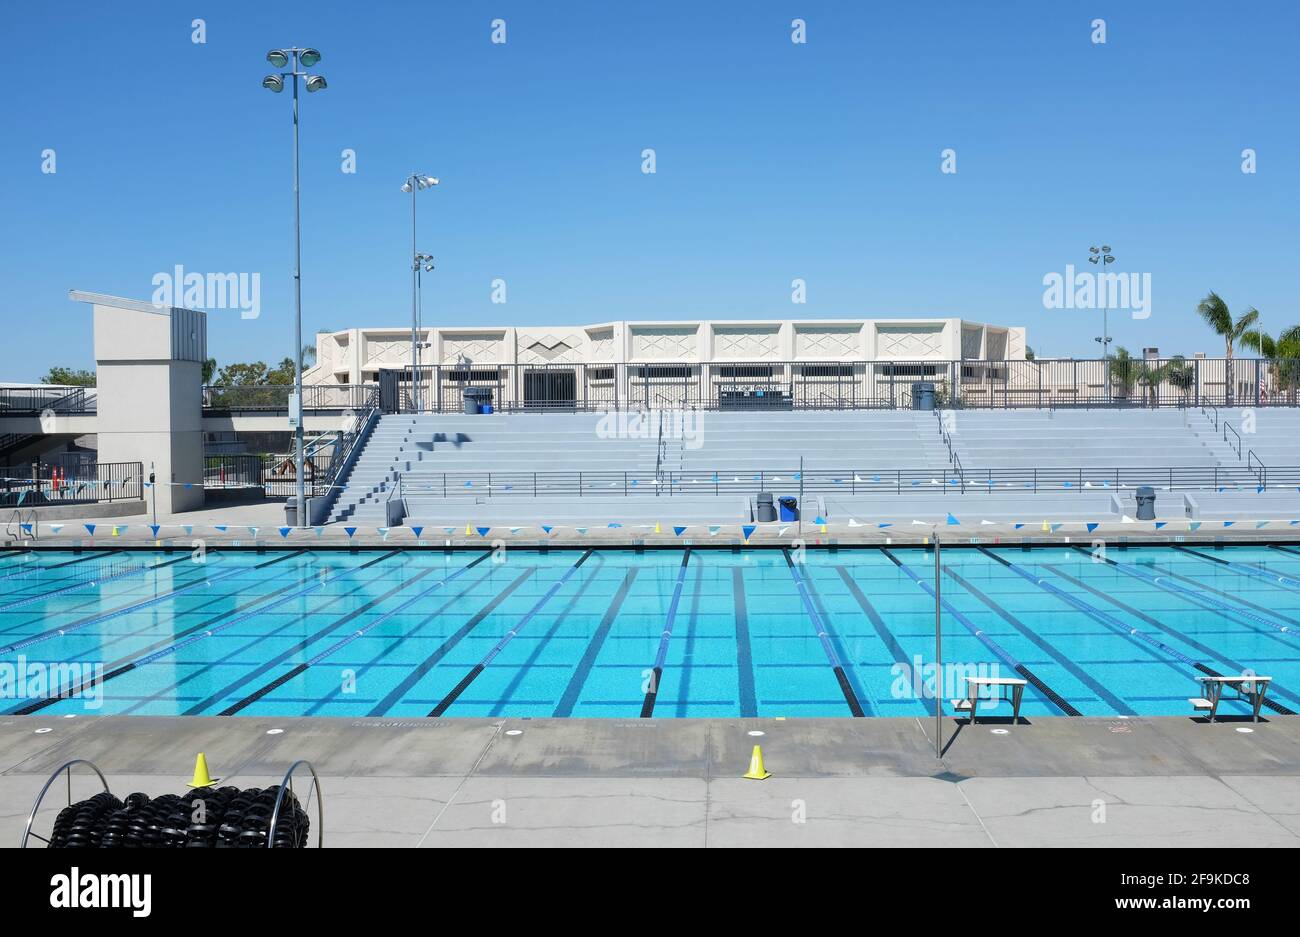 https://c8.alamy.com/comp/2F9KDC8/irvine-ca-18-apr-2021-william-woollett-aquatics-center-a-venue-for-local-regional-and-national-competitive-events-and-features-two-50-meter-pool-2F9KDC8.jpg